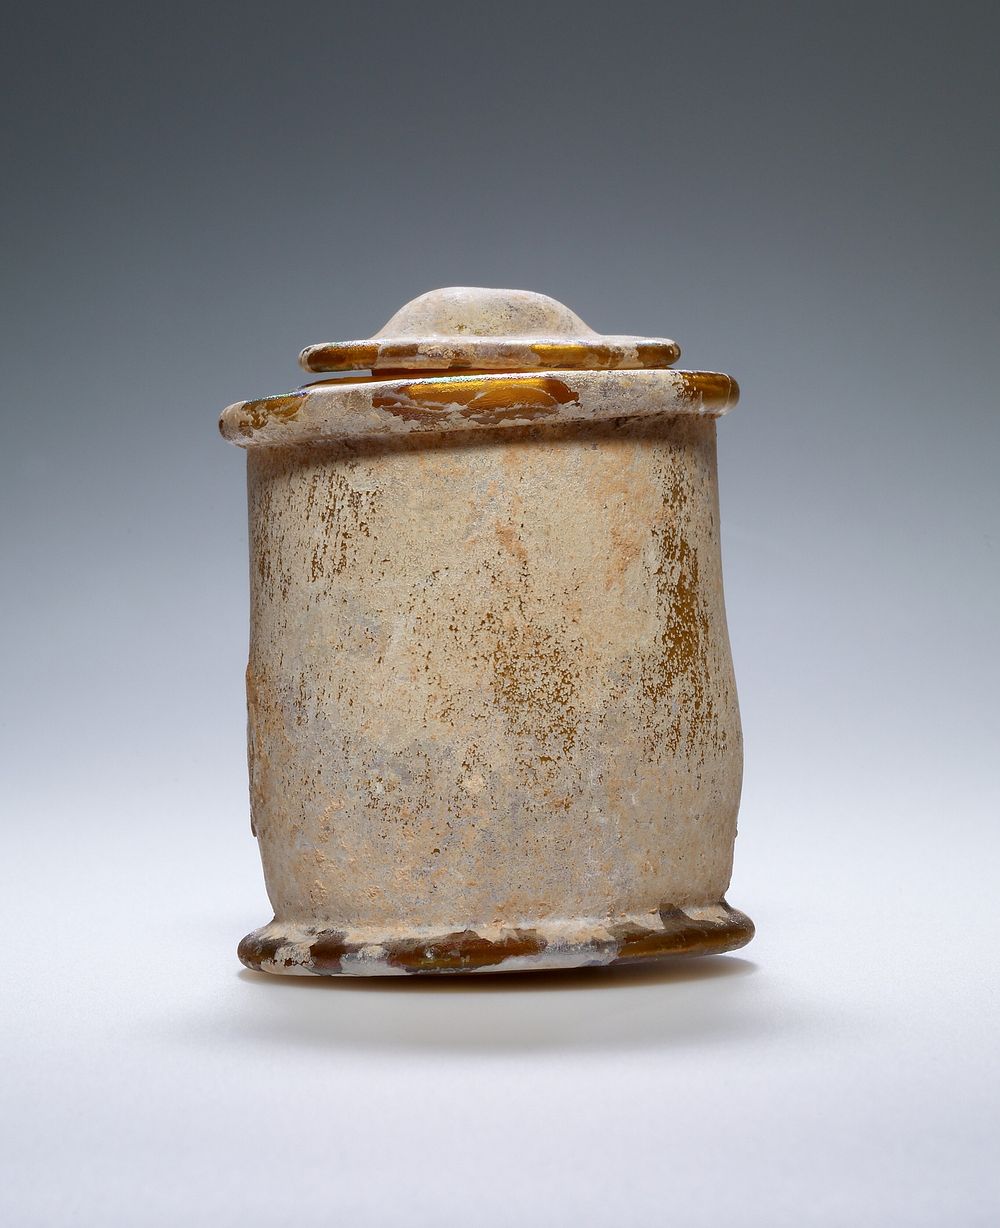 Amber-colored Pyxis with lid